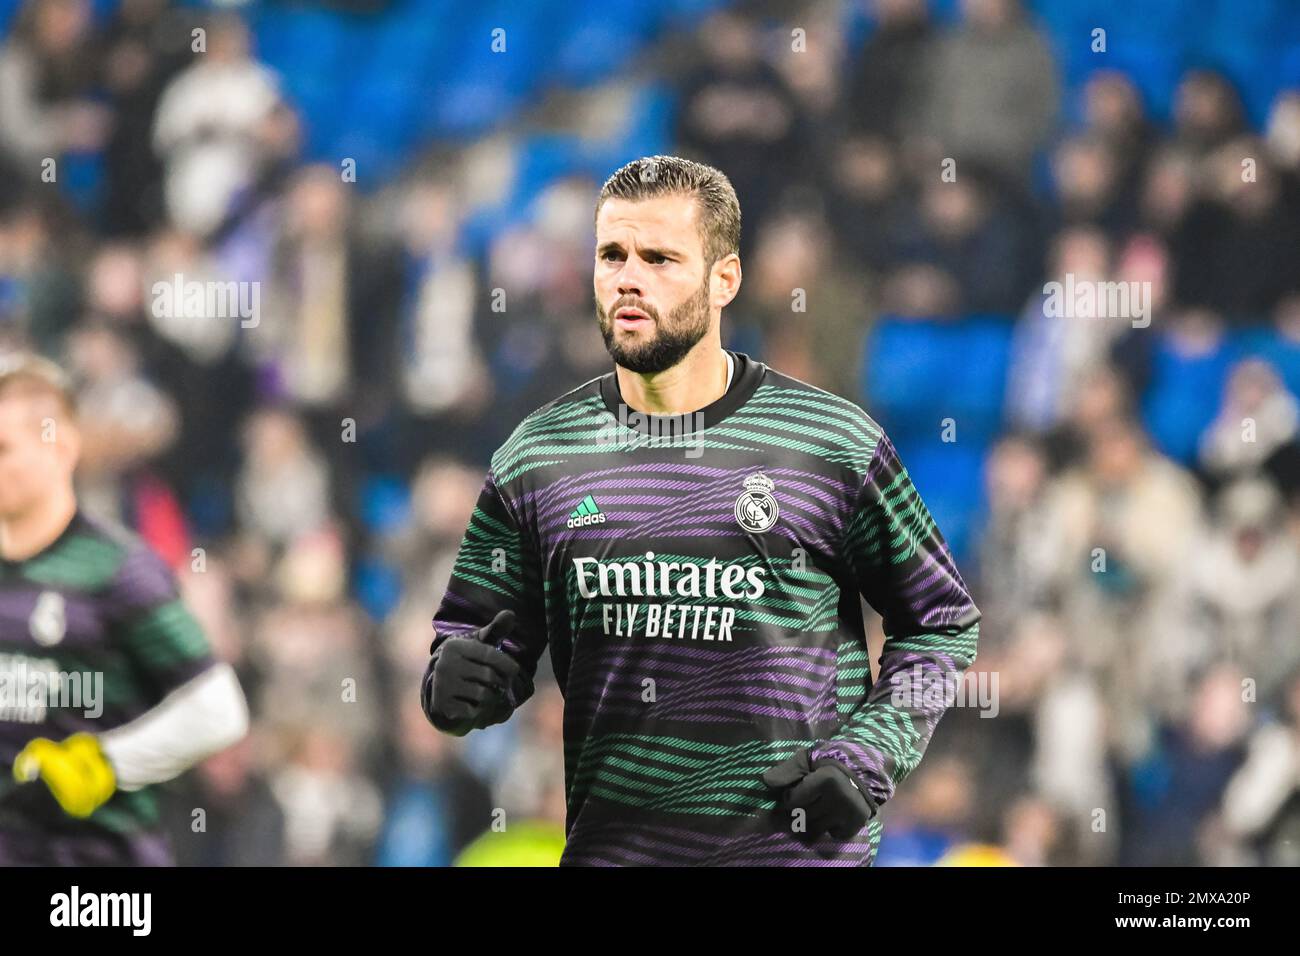 MADRID, SPAIN - FEBRUARY 2: Nacho Fernandez of Real Madrid CF in the warm up of the match between Real Madrid CF and Valencia CF of La Liga Santander on February 2, 2022 at Santiago Bernabeu of Madrid, Spain. (Photo by Samuel Carreño/ PX Images) Stock Photo